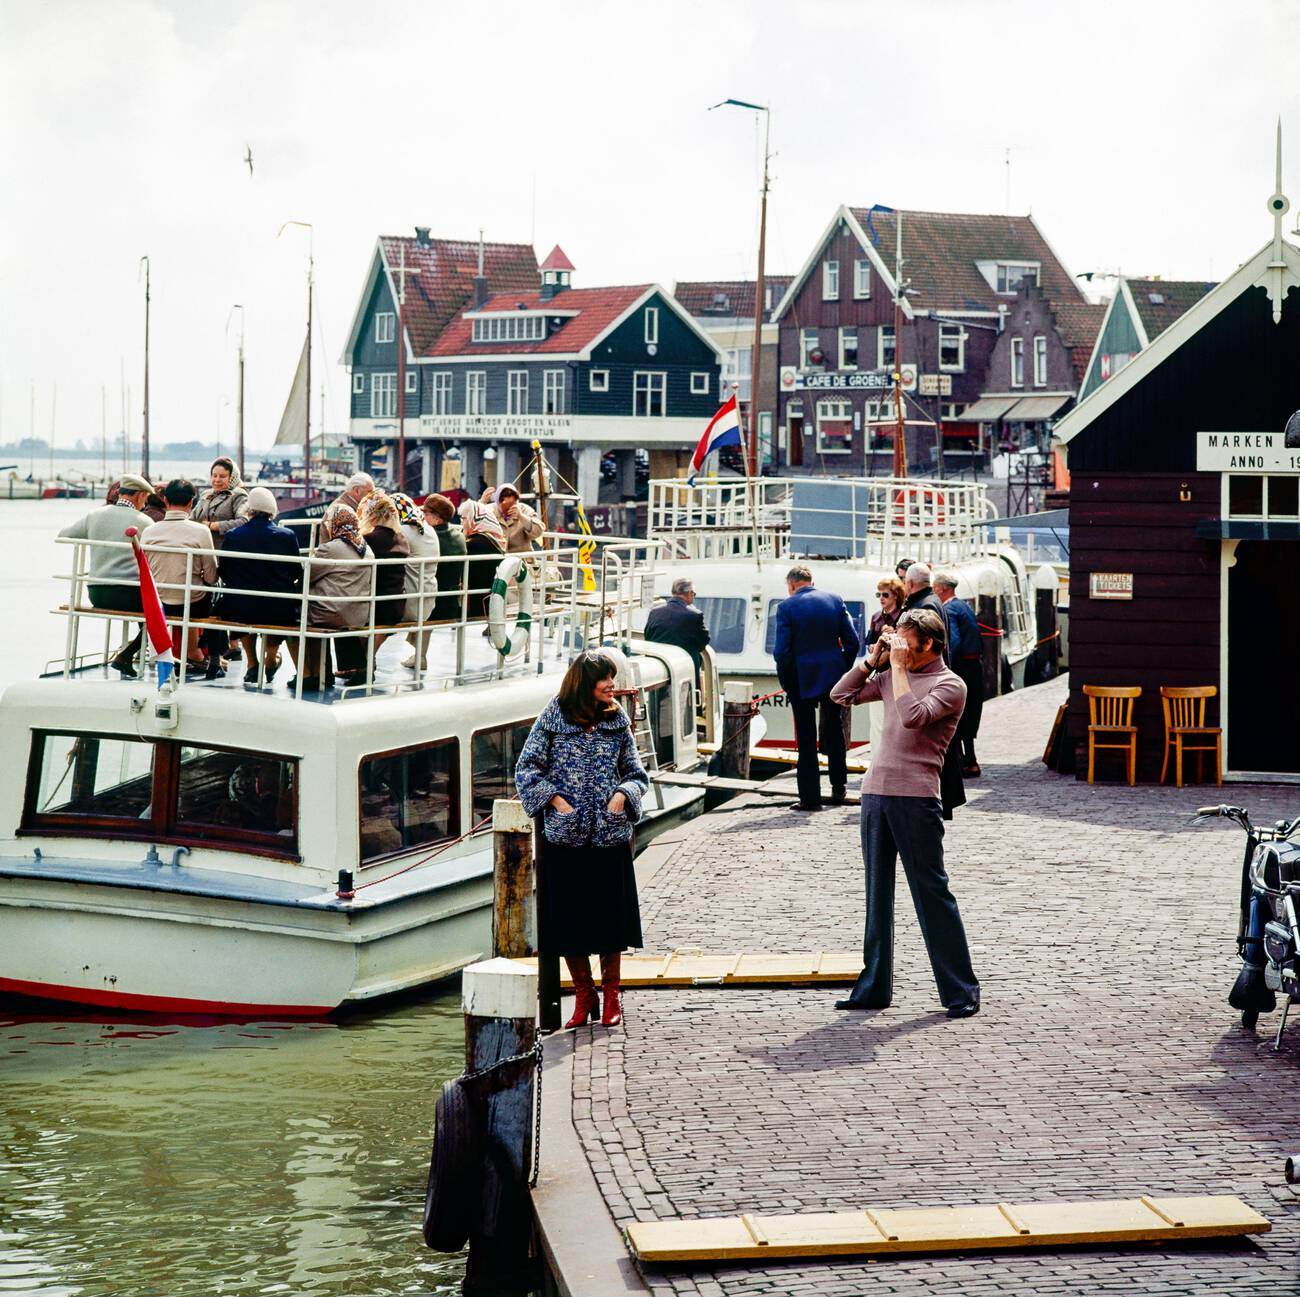 A couple of middle-aged tourists taking pictures at Marken harbor, Waterland, Northern Holland, The Netherlands in the 1970s.